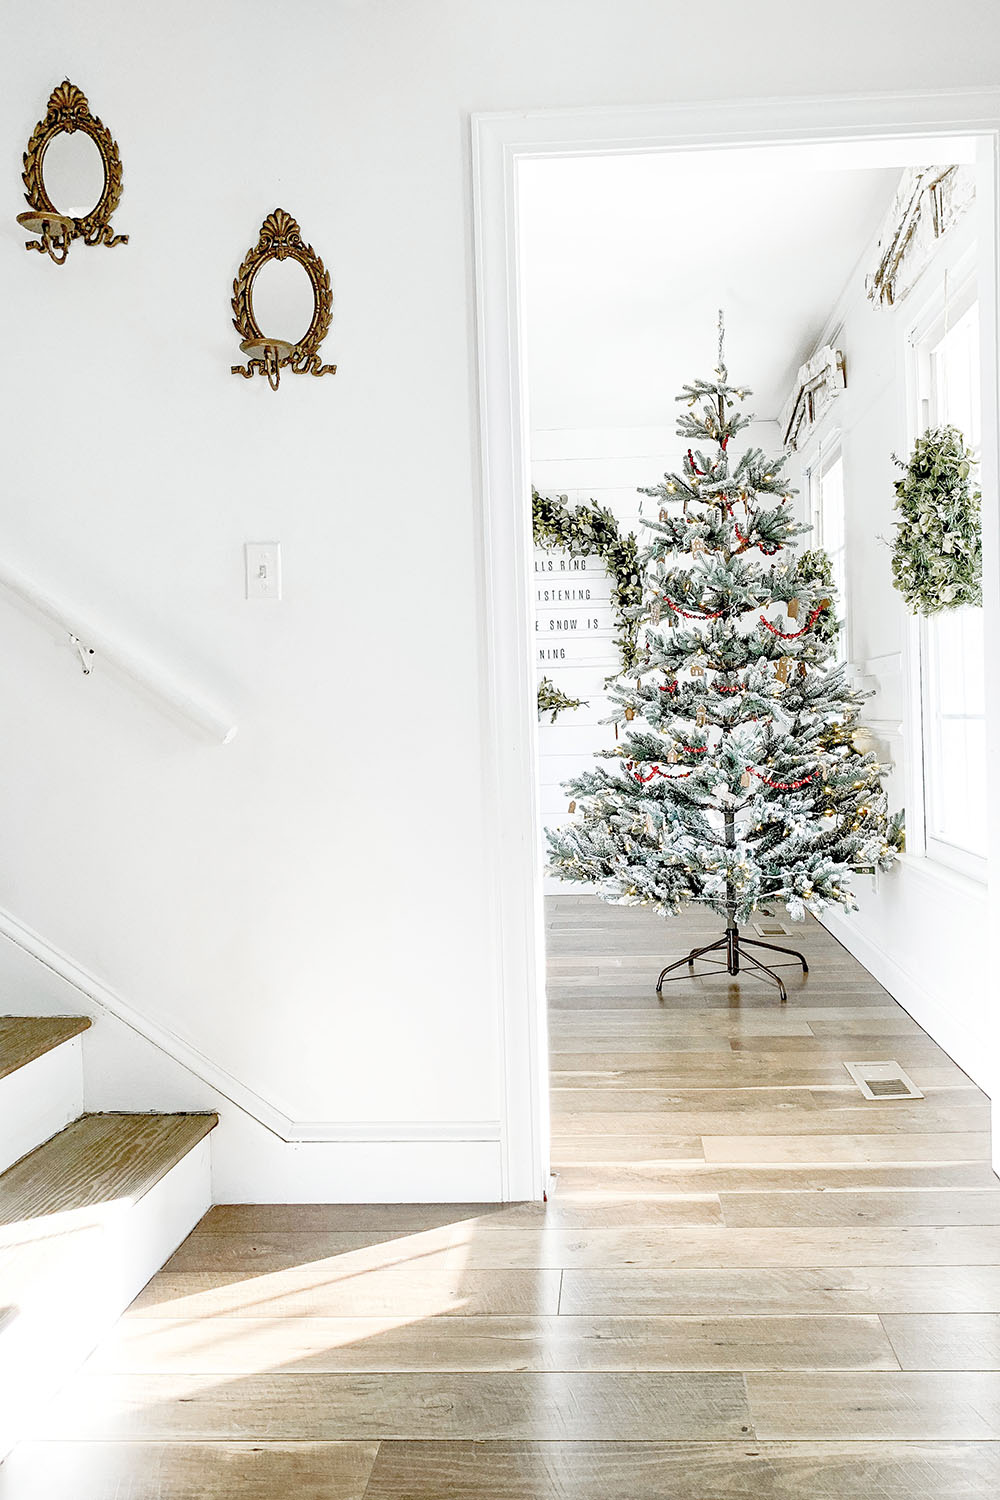 Stair entryway with Christmas tree